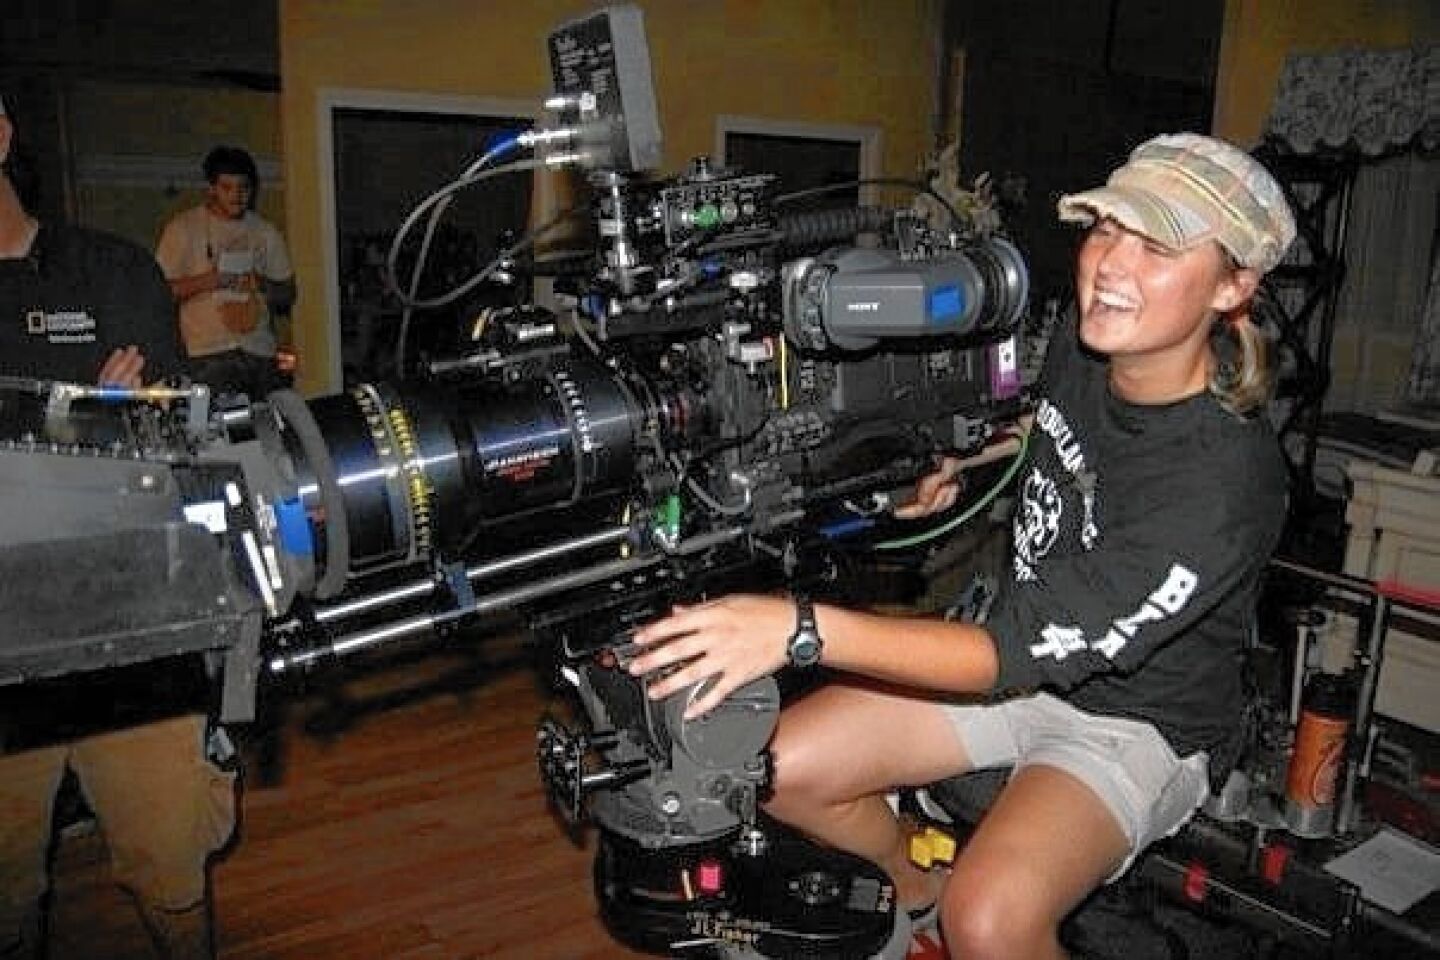 Sarah Jones, an assistant camera operator, was killed on a film set in Georgia in 2014.